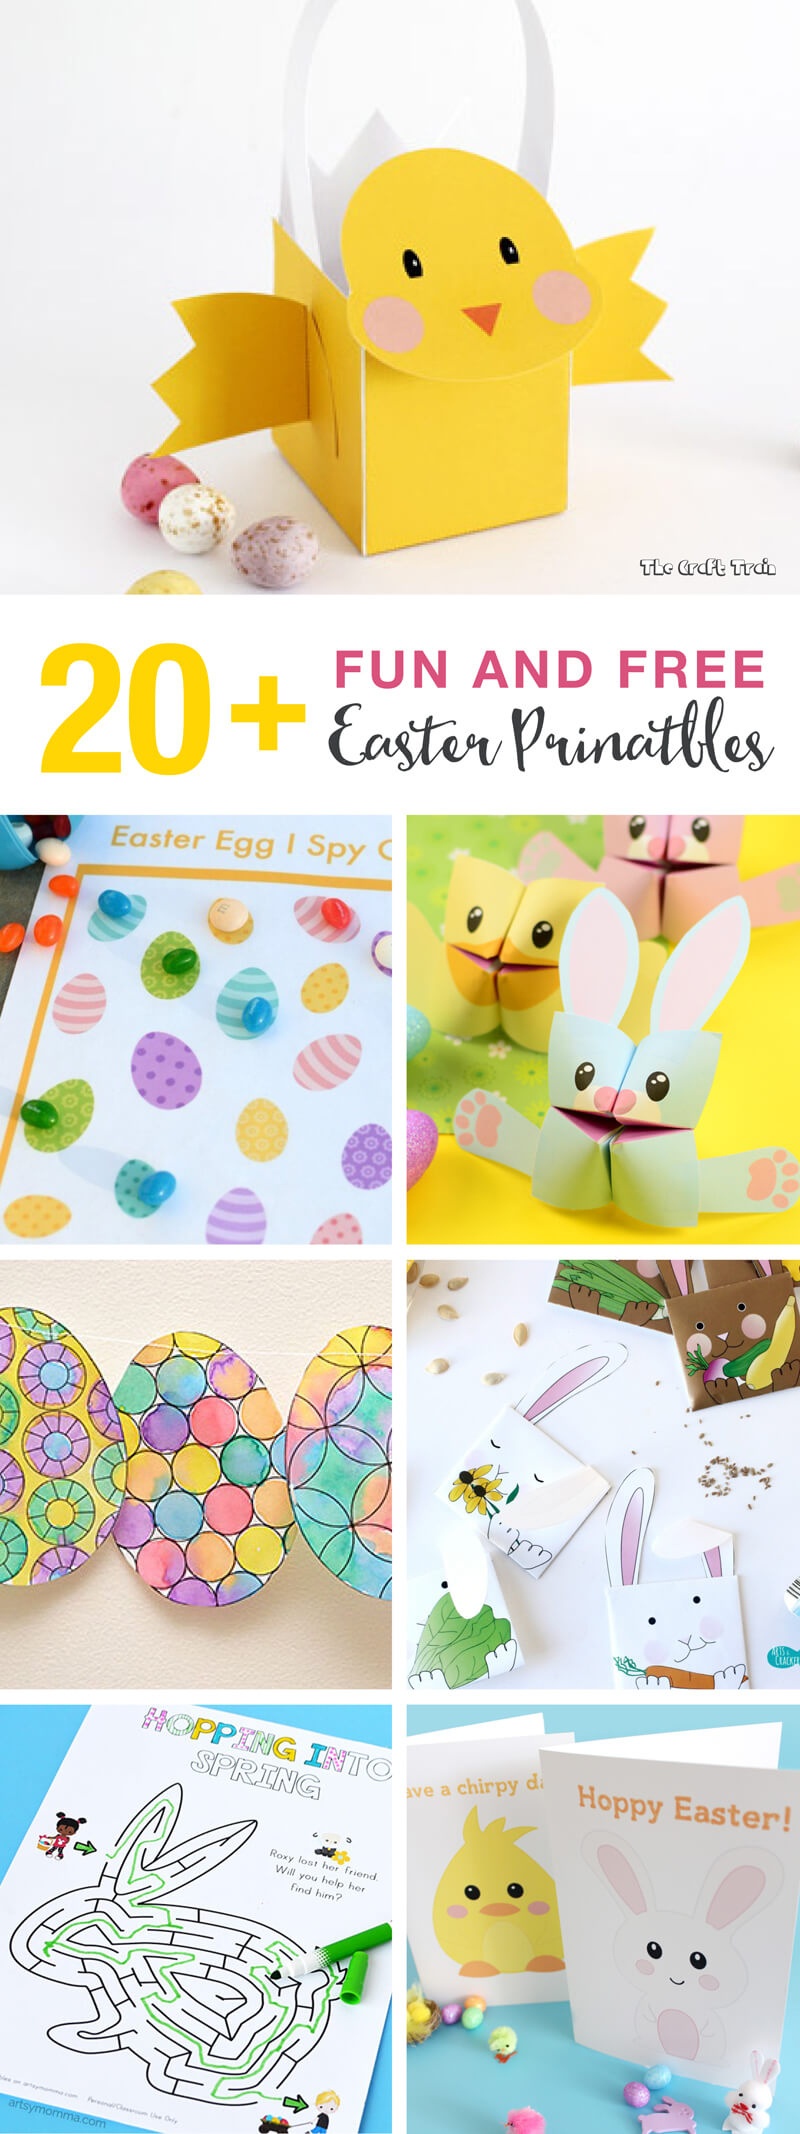 20+ Fun And Free Easter Printables For Kids | The Craft Train - Free Printable Easter Bunting